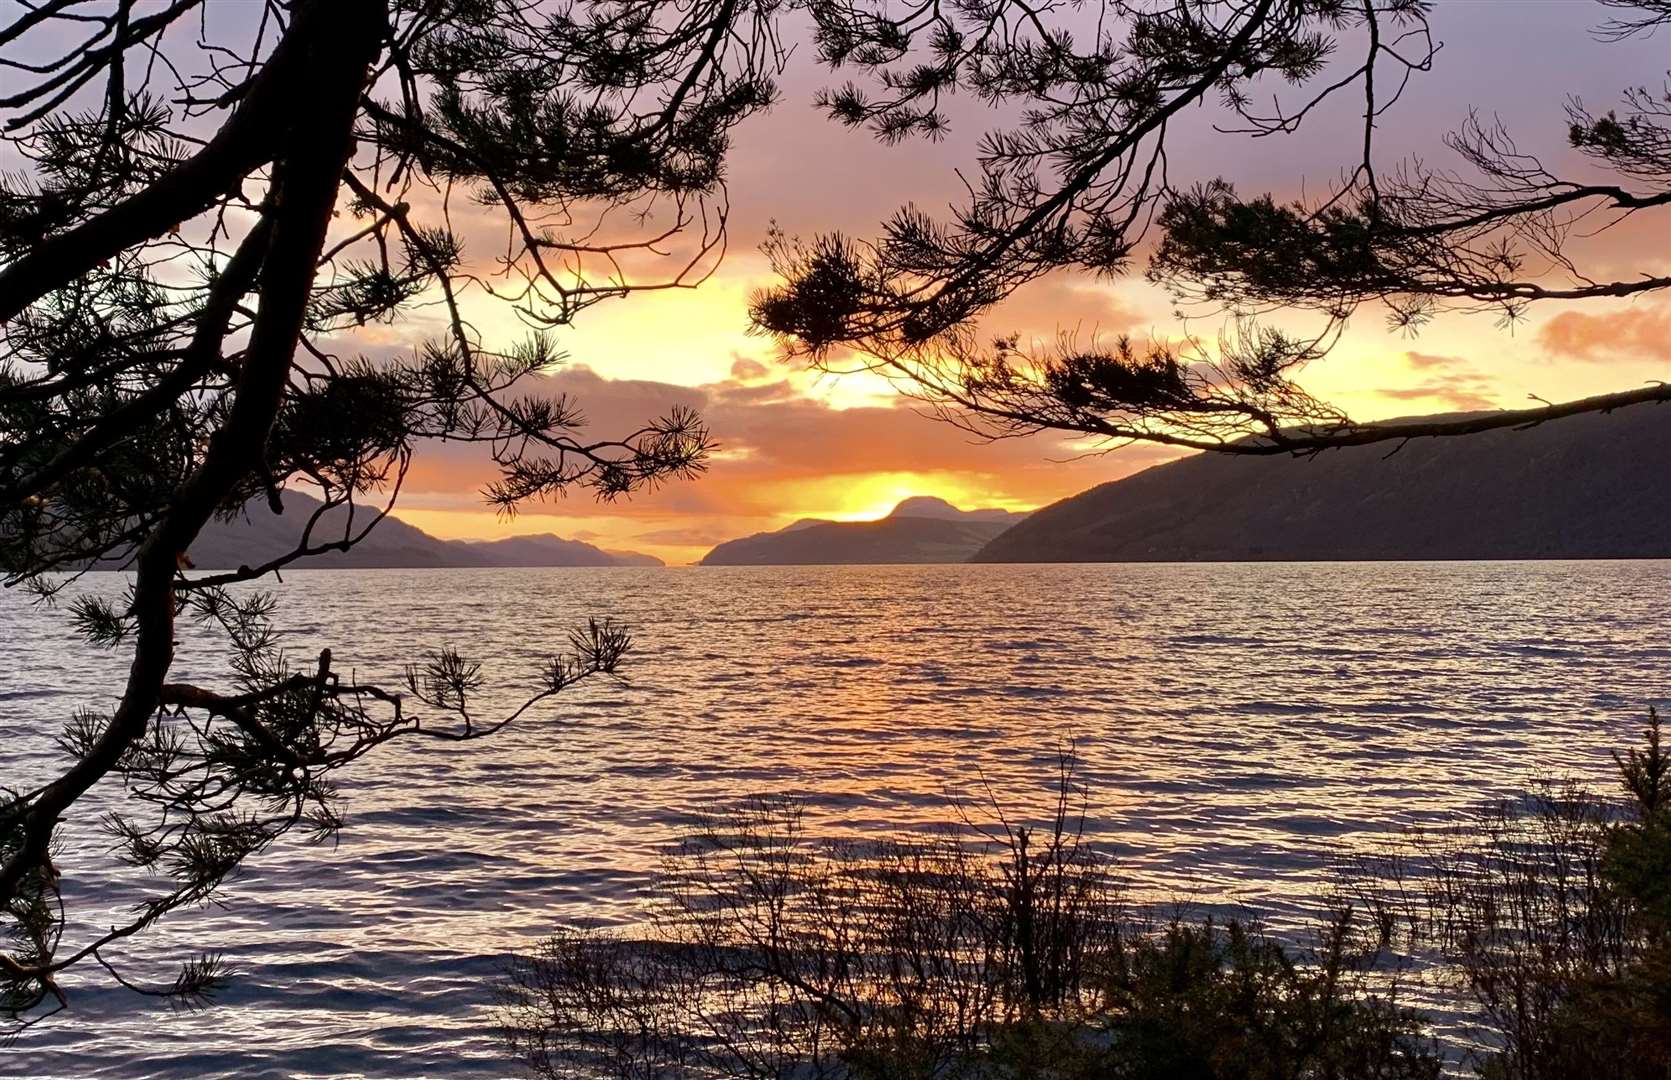 The sun sets behind Meall Fuar-mhonaidh on Loch Ness – taken at Dores by Richard Castro, Inverness Men’s Shed.